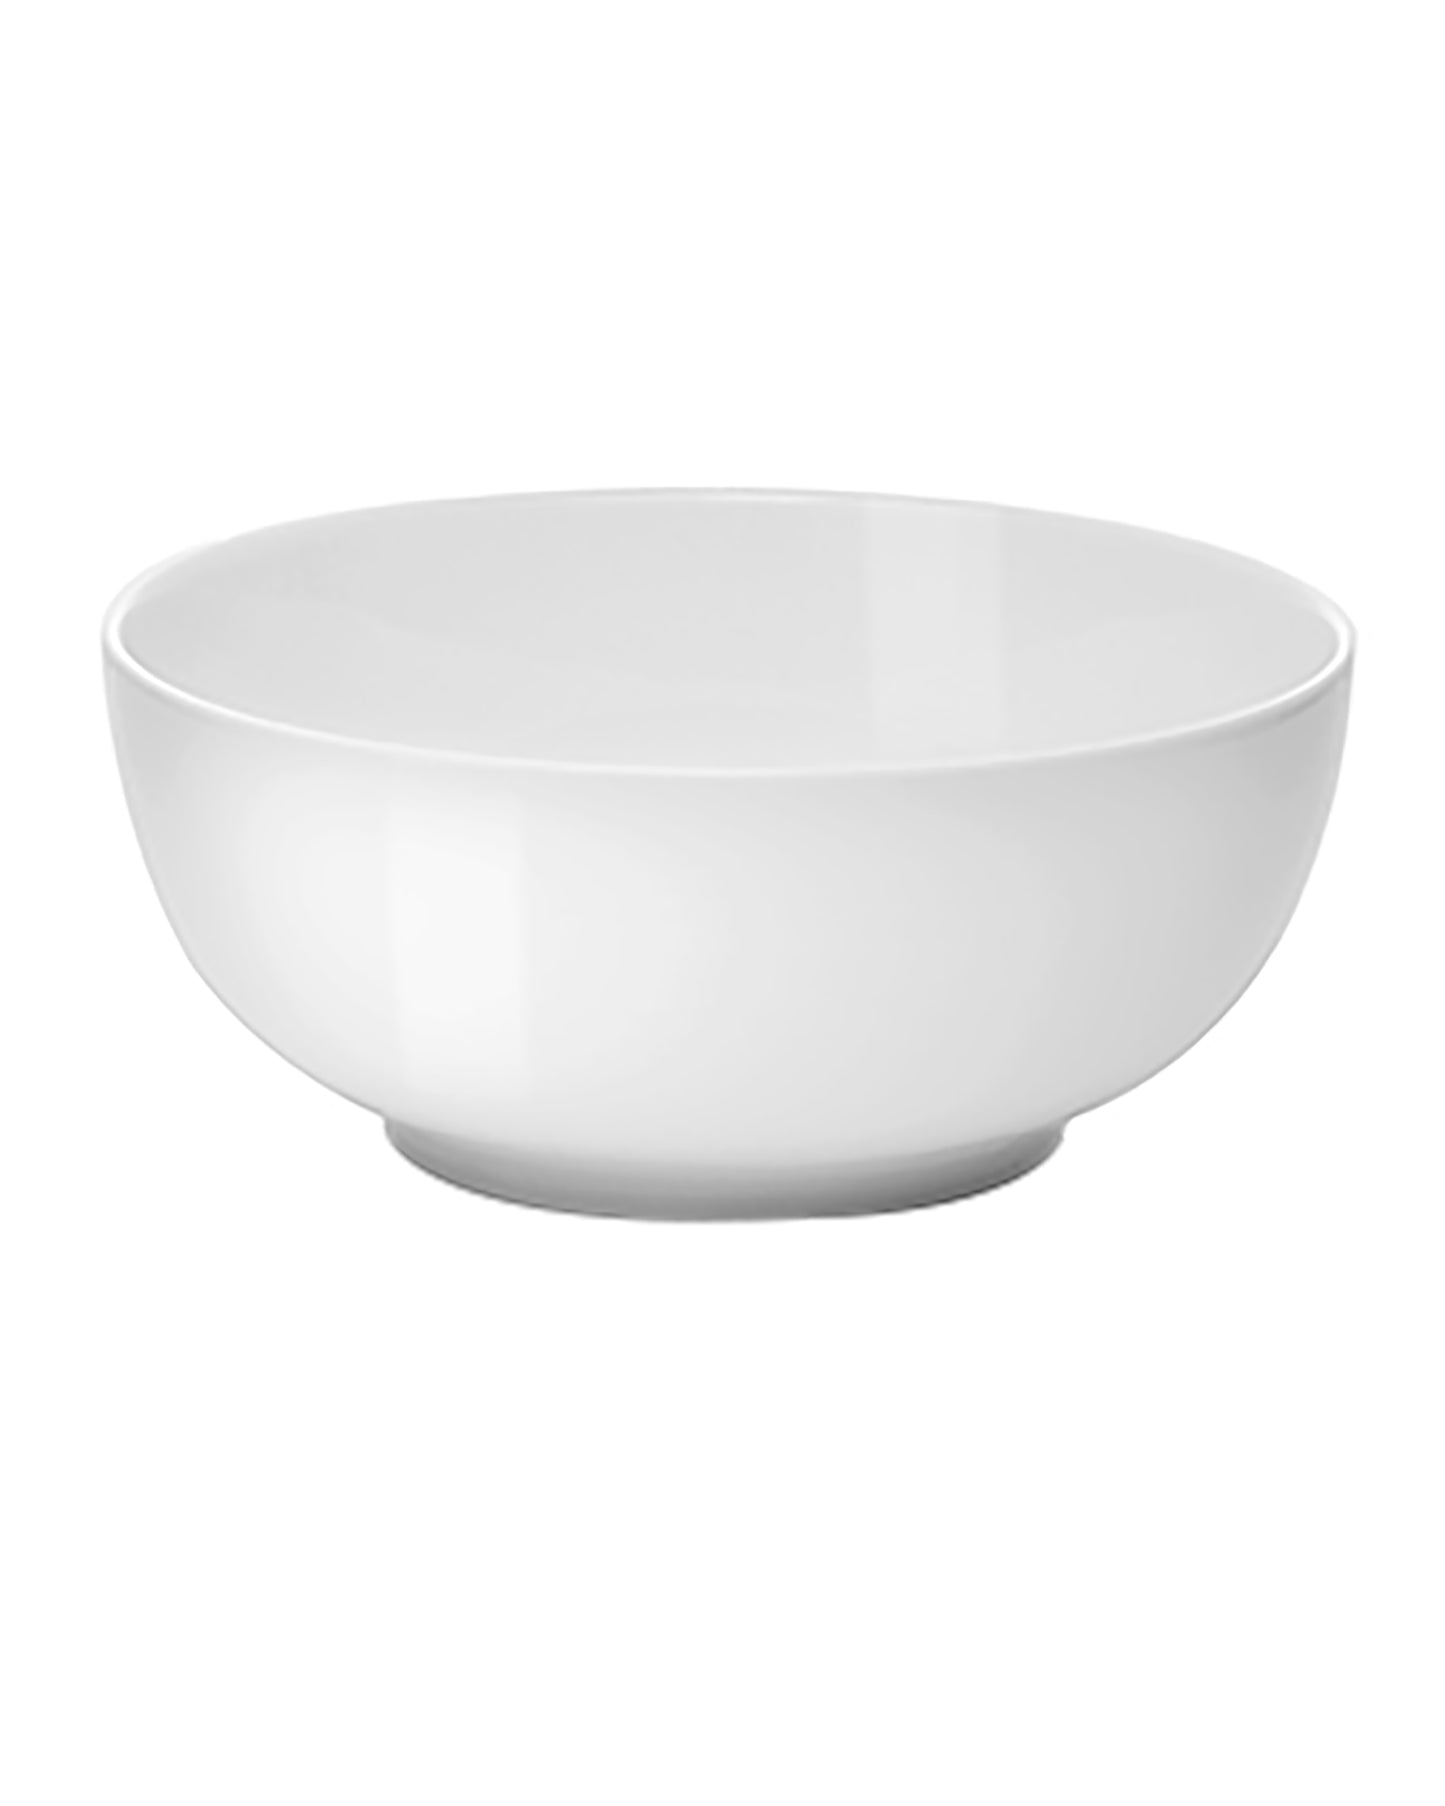 9 Ounce Small Cereal and Soup Bowls, Sturdy Porcelain Bowl, Dishwasher Microwave Safe, Portion Control Bowls for Ice Cream Dessert Rice, set of 2, 5 Inches, White